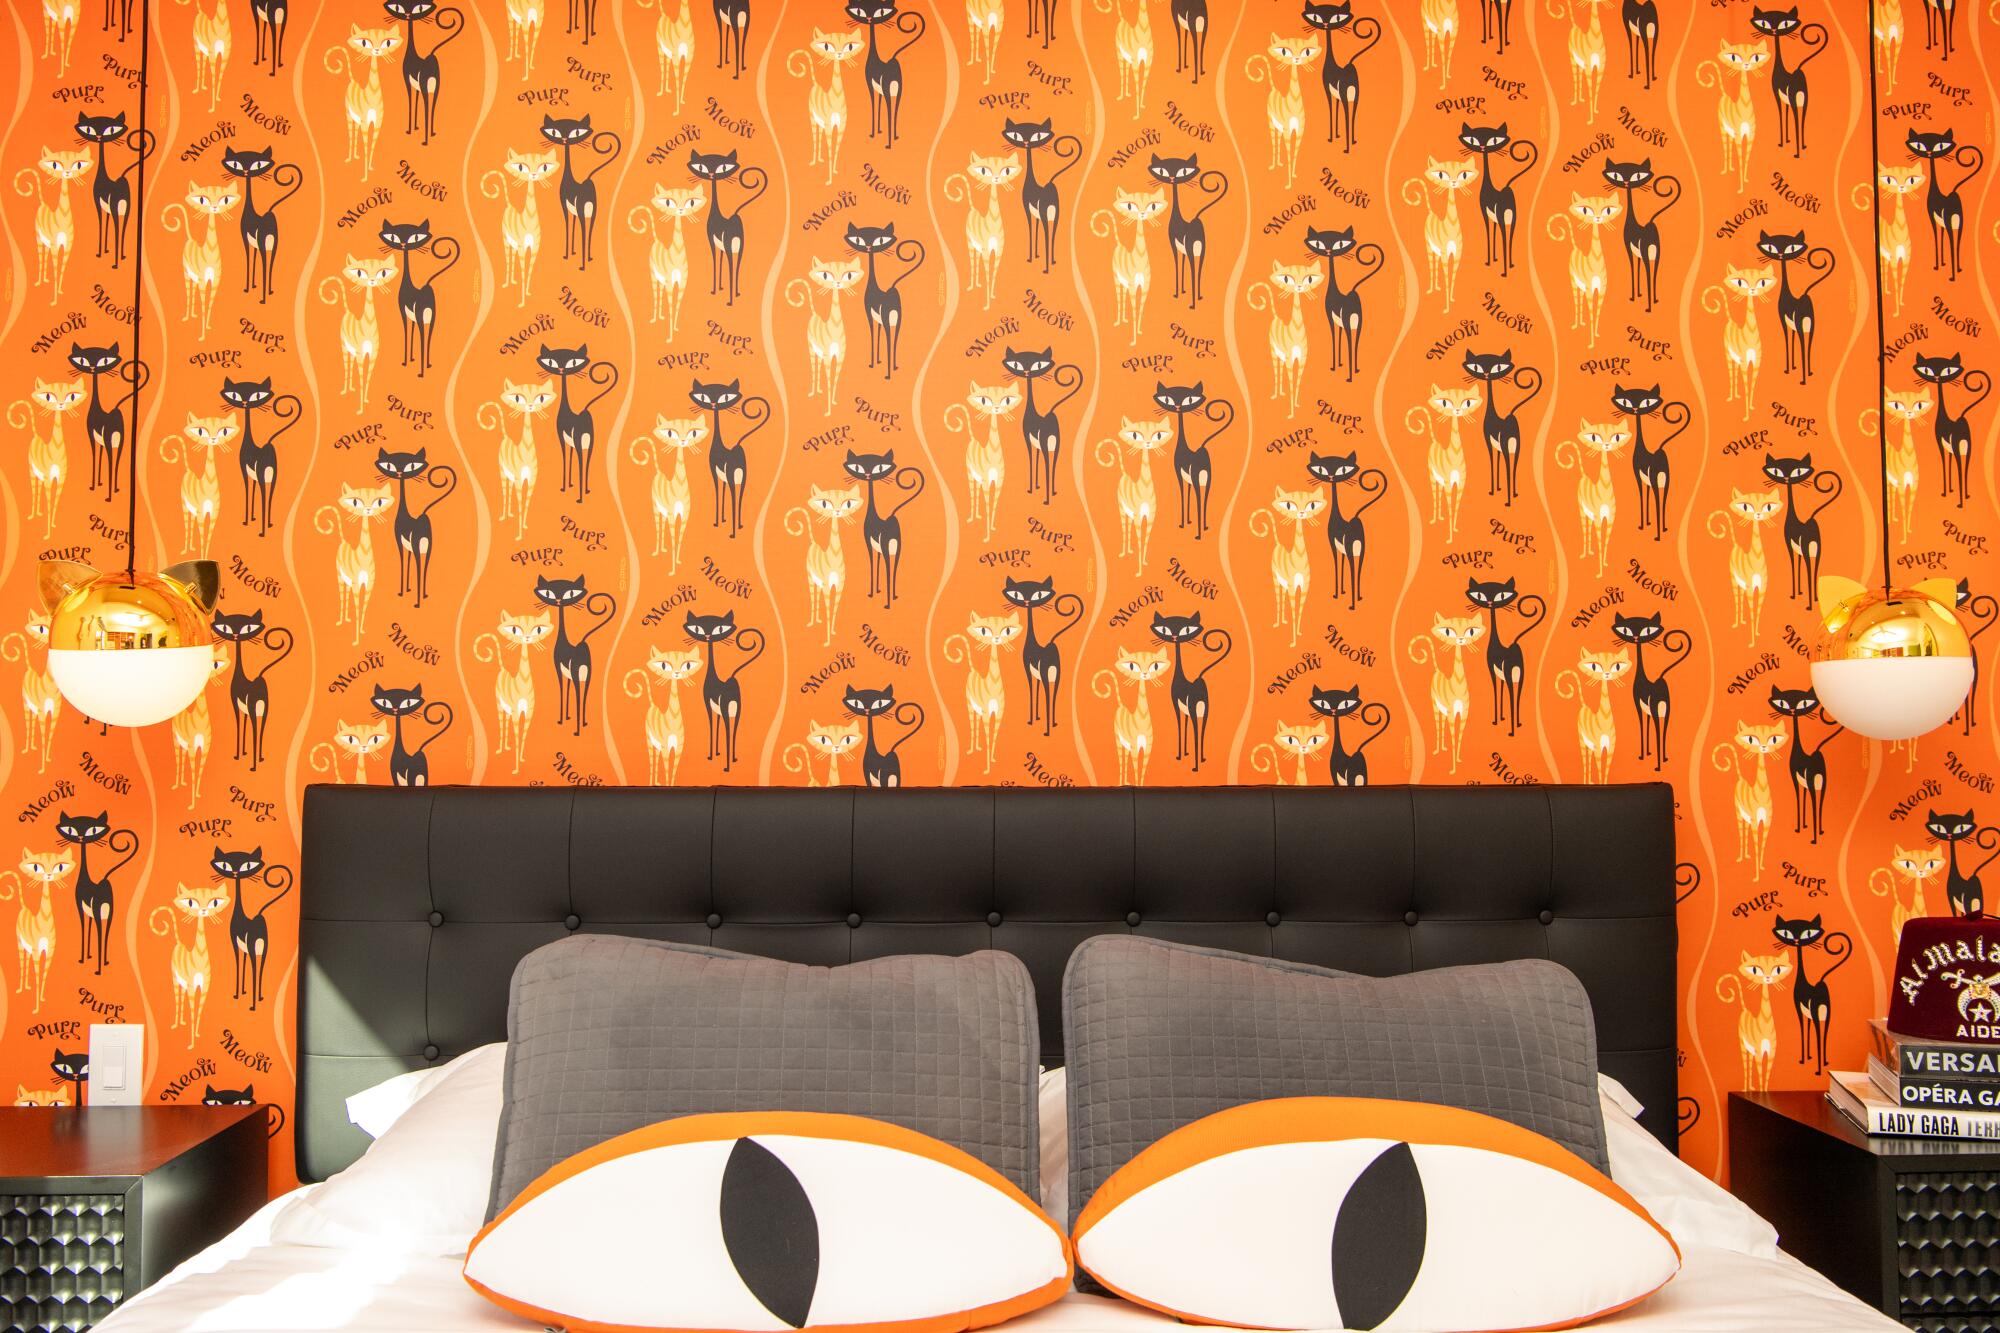 A cat-themed bedroom in the Shag House has cats on the wallpaper and cat-eye pillows on the bed.